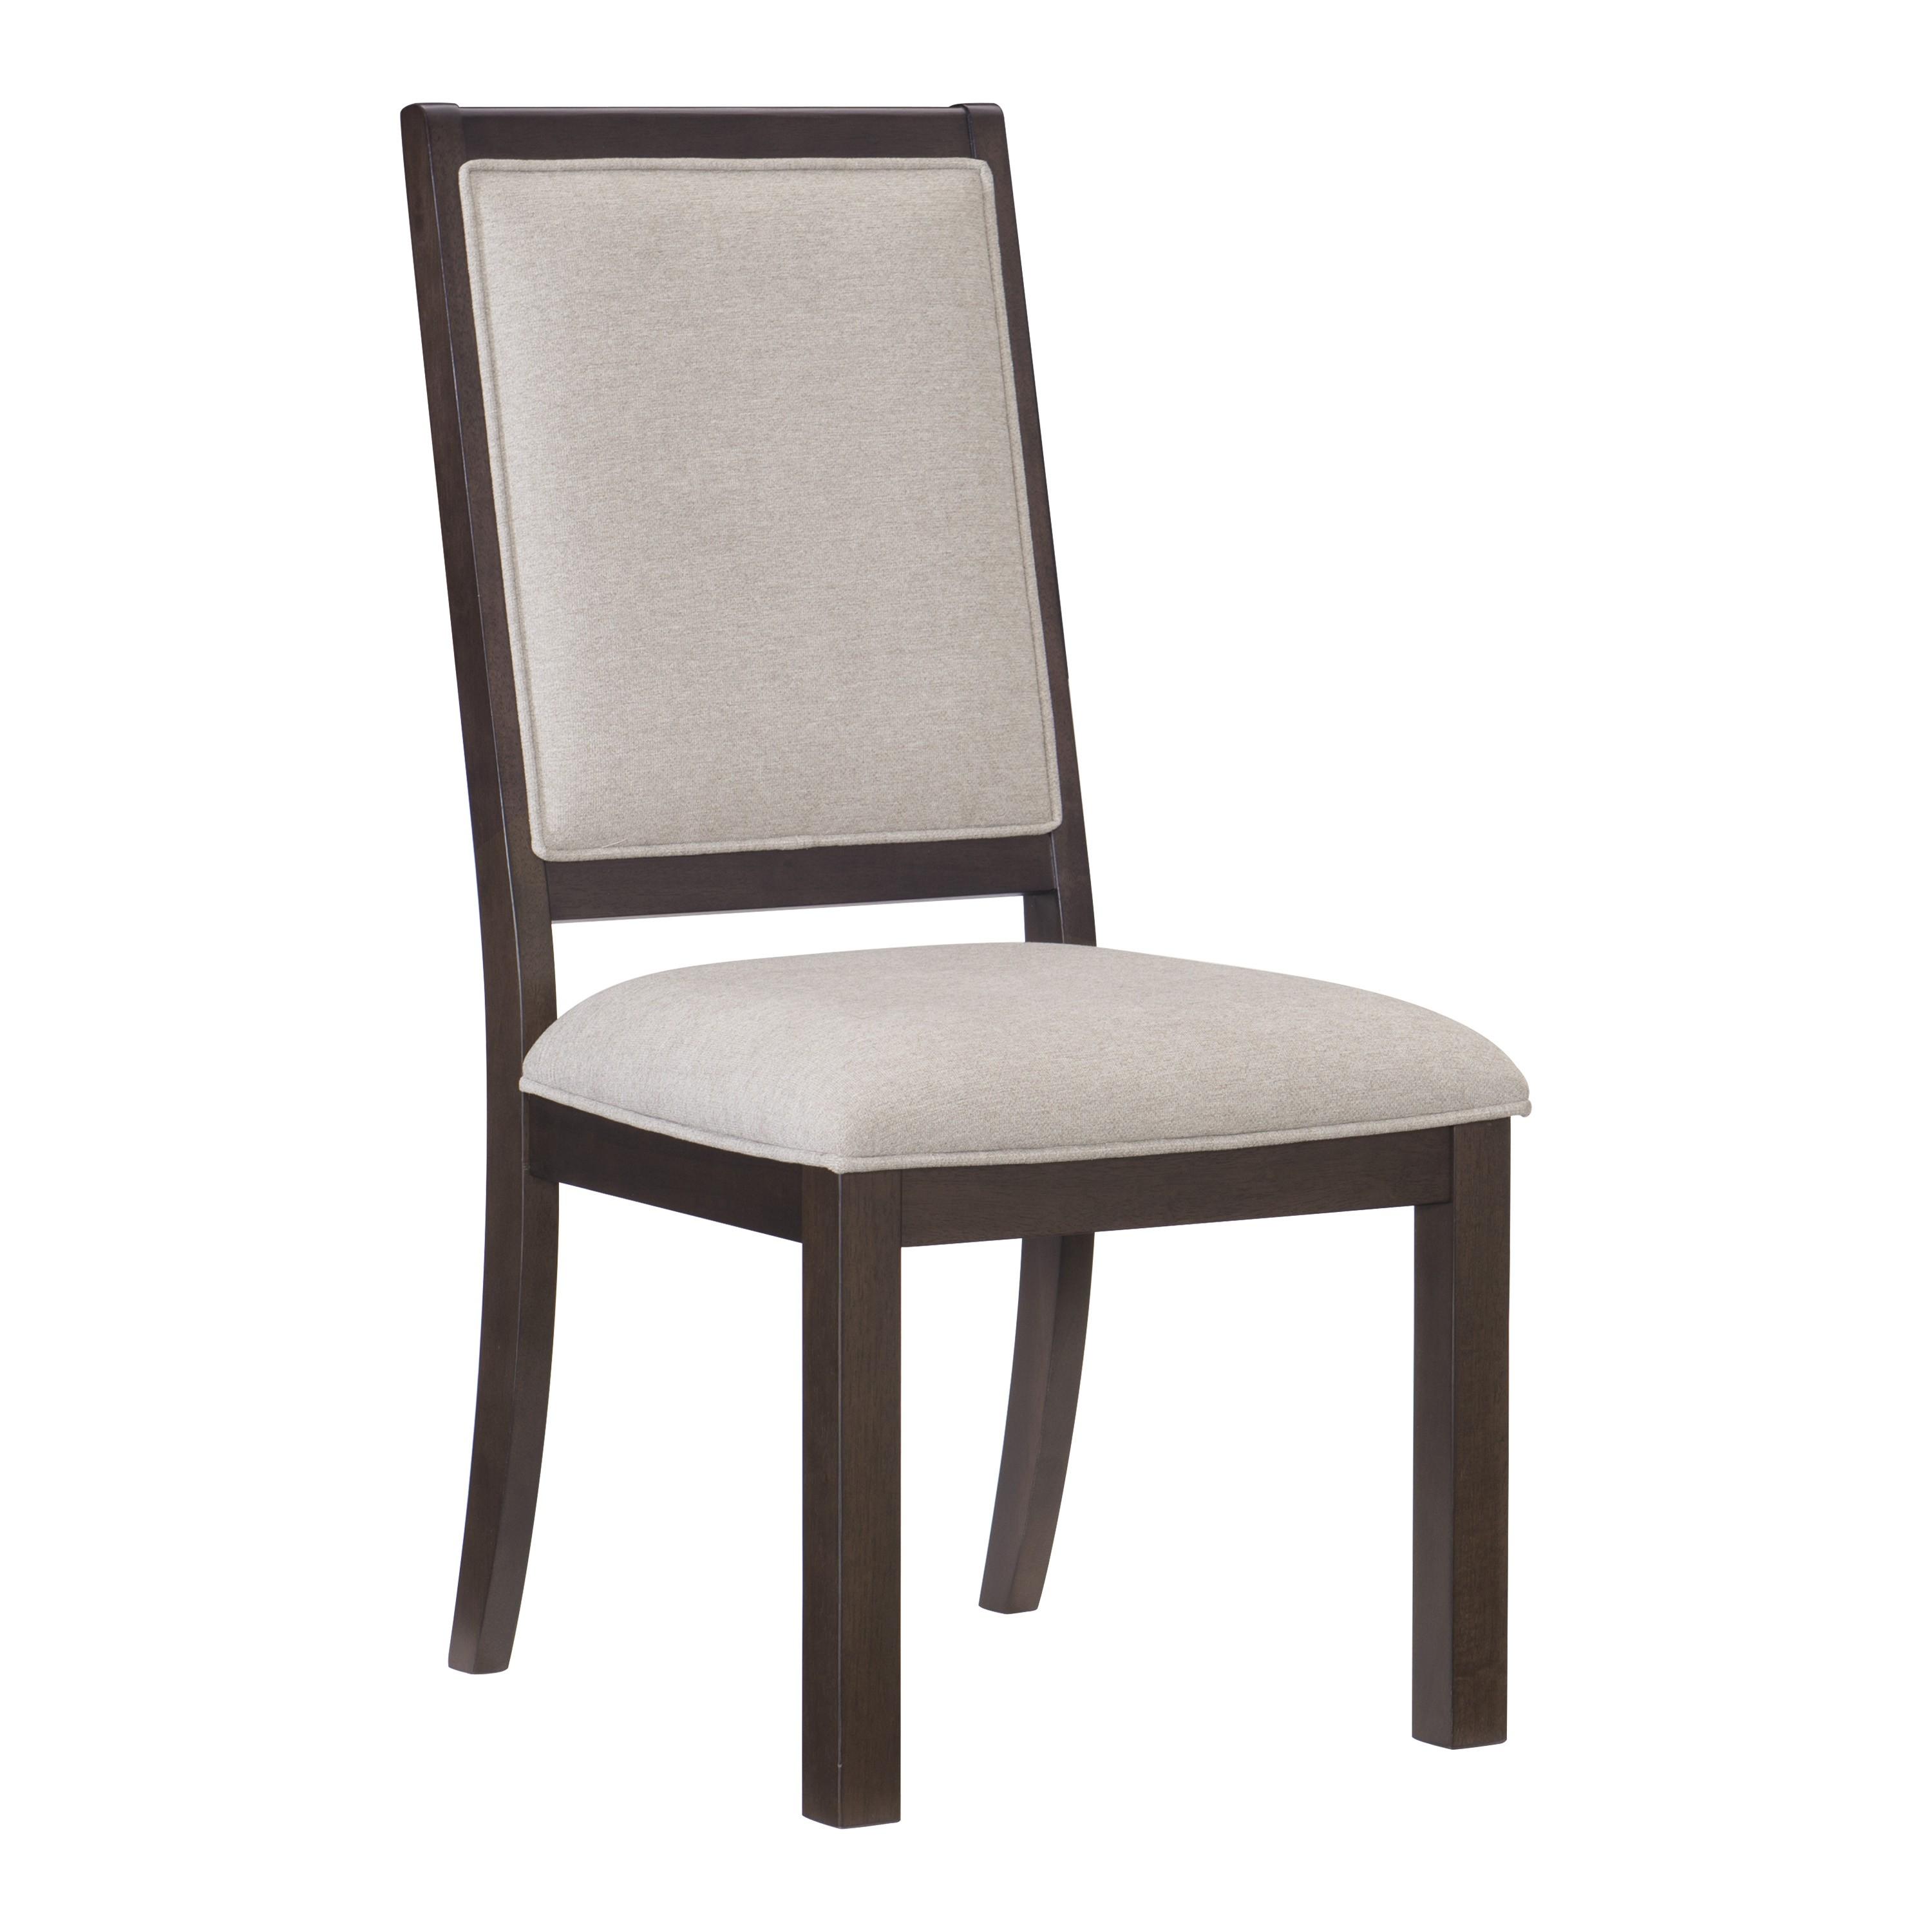 Transitional Side Chair Set 5718S Josie 5718S in Espresso Polyester